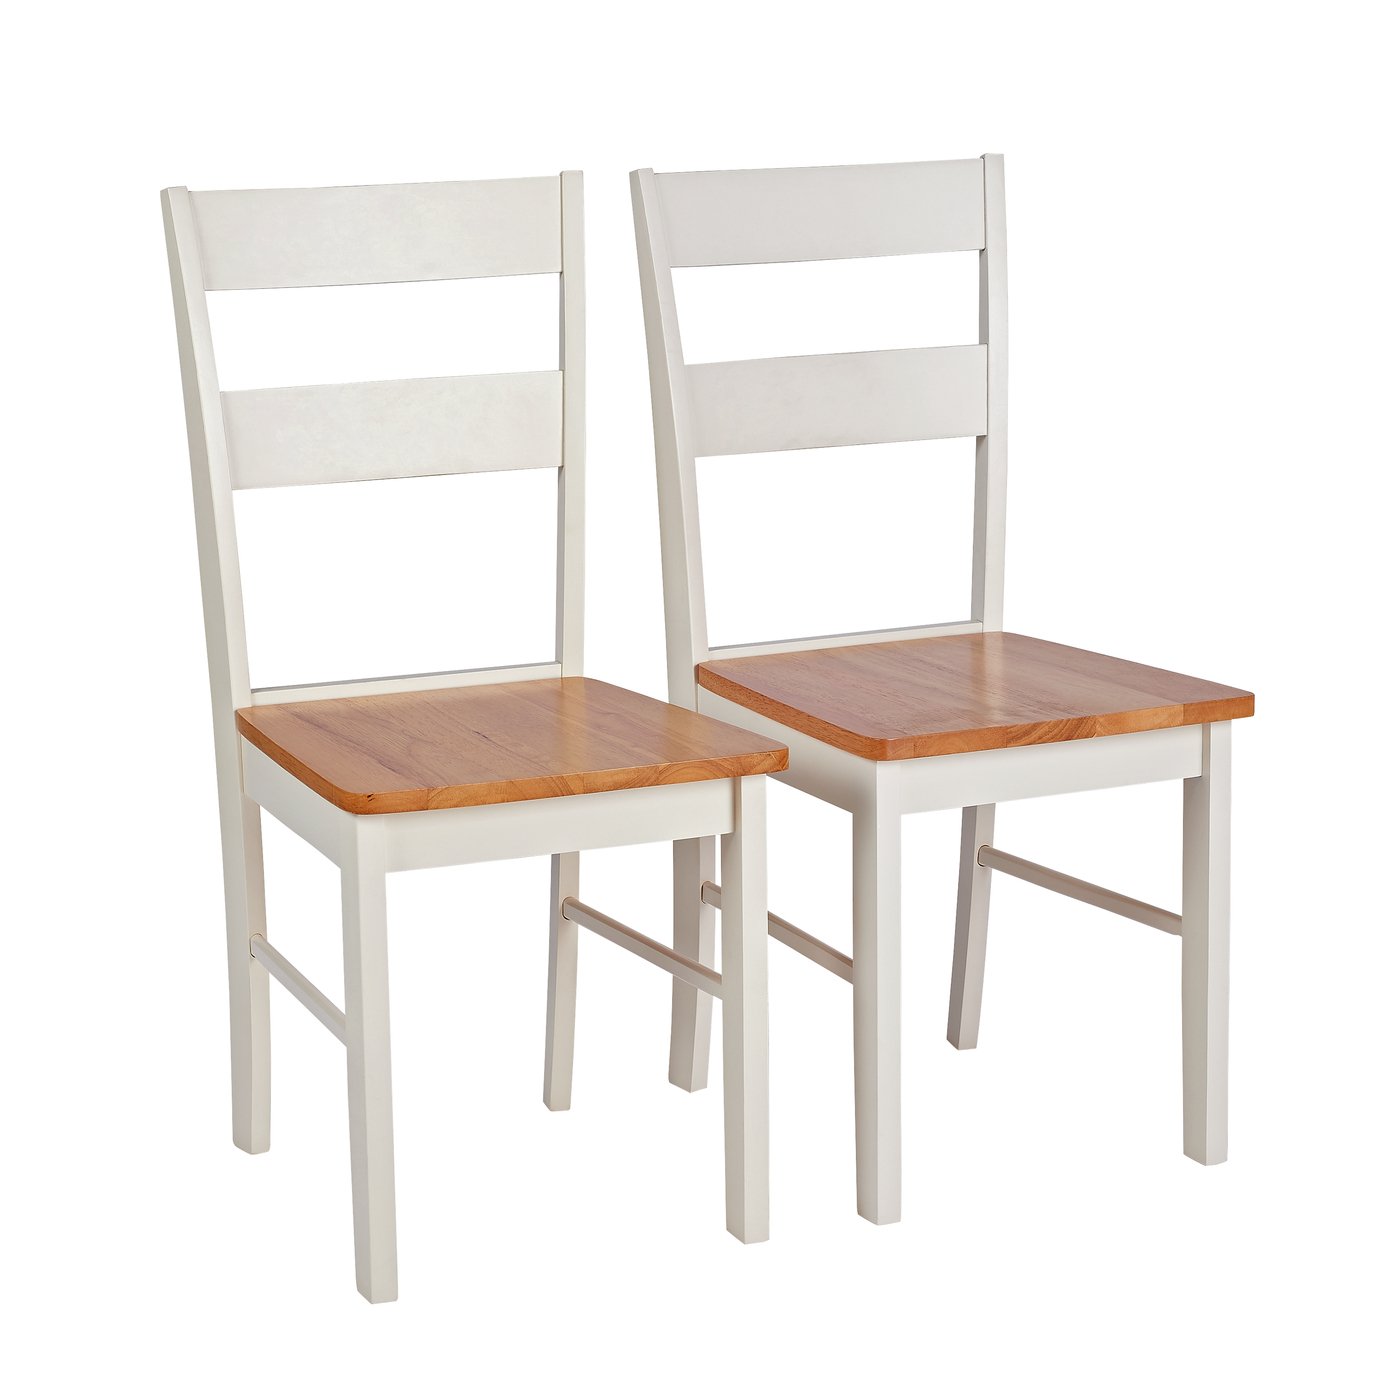 Argos Home Chicago Pair of Dining Chairs review